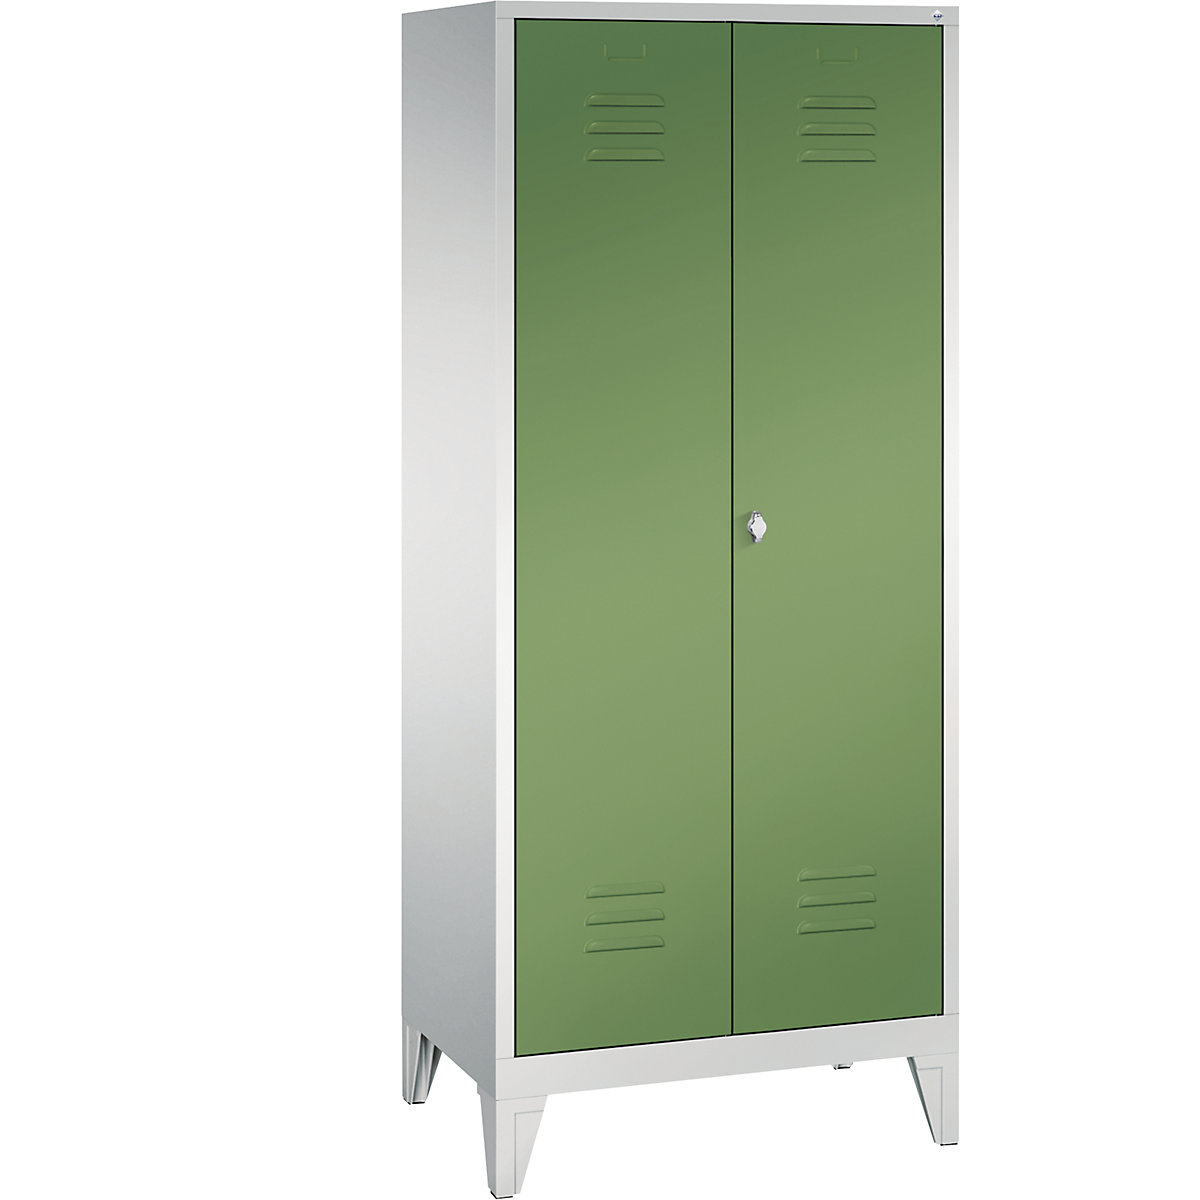 CLASSIC storage cupboard with feet, doors close in the middle – C+P, 2 compartments, compartment width 400 mm, light grey / reseda green-3